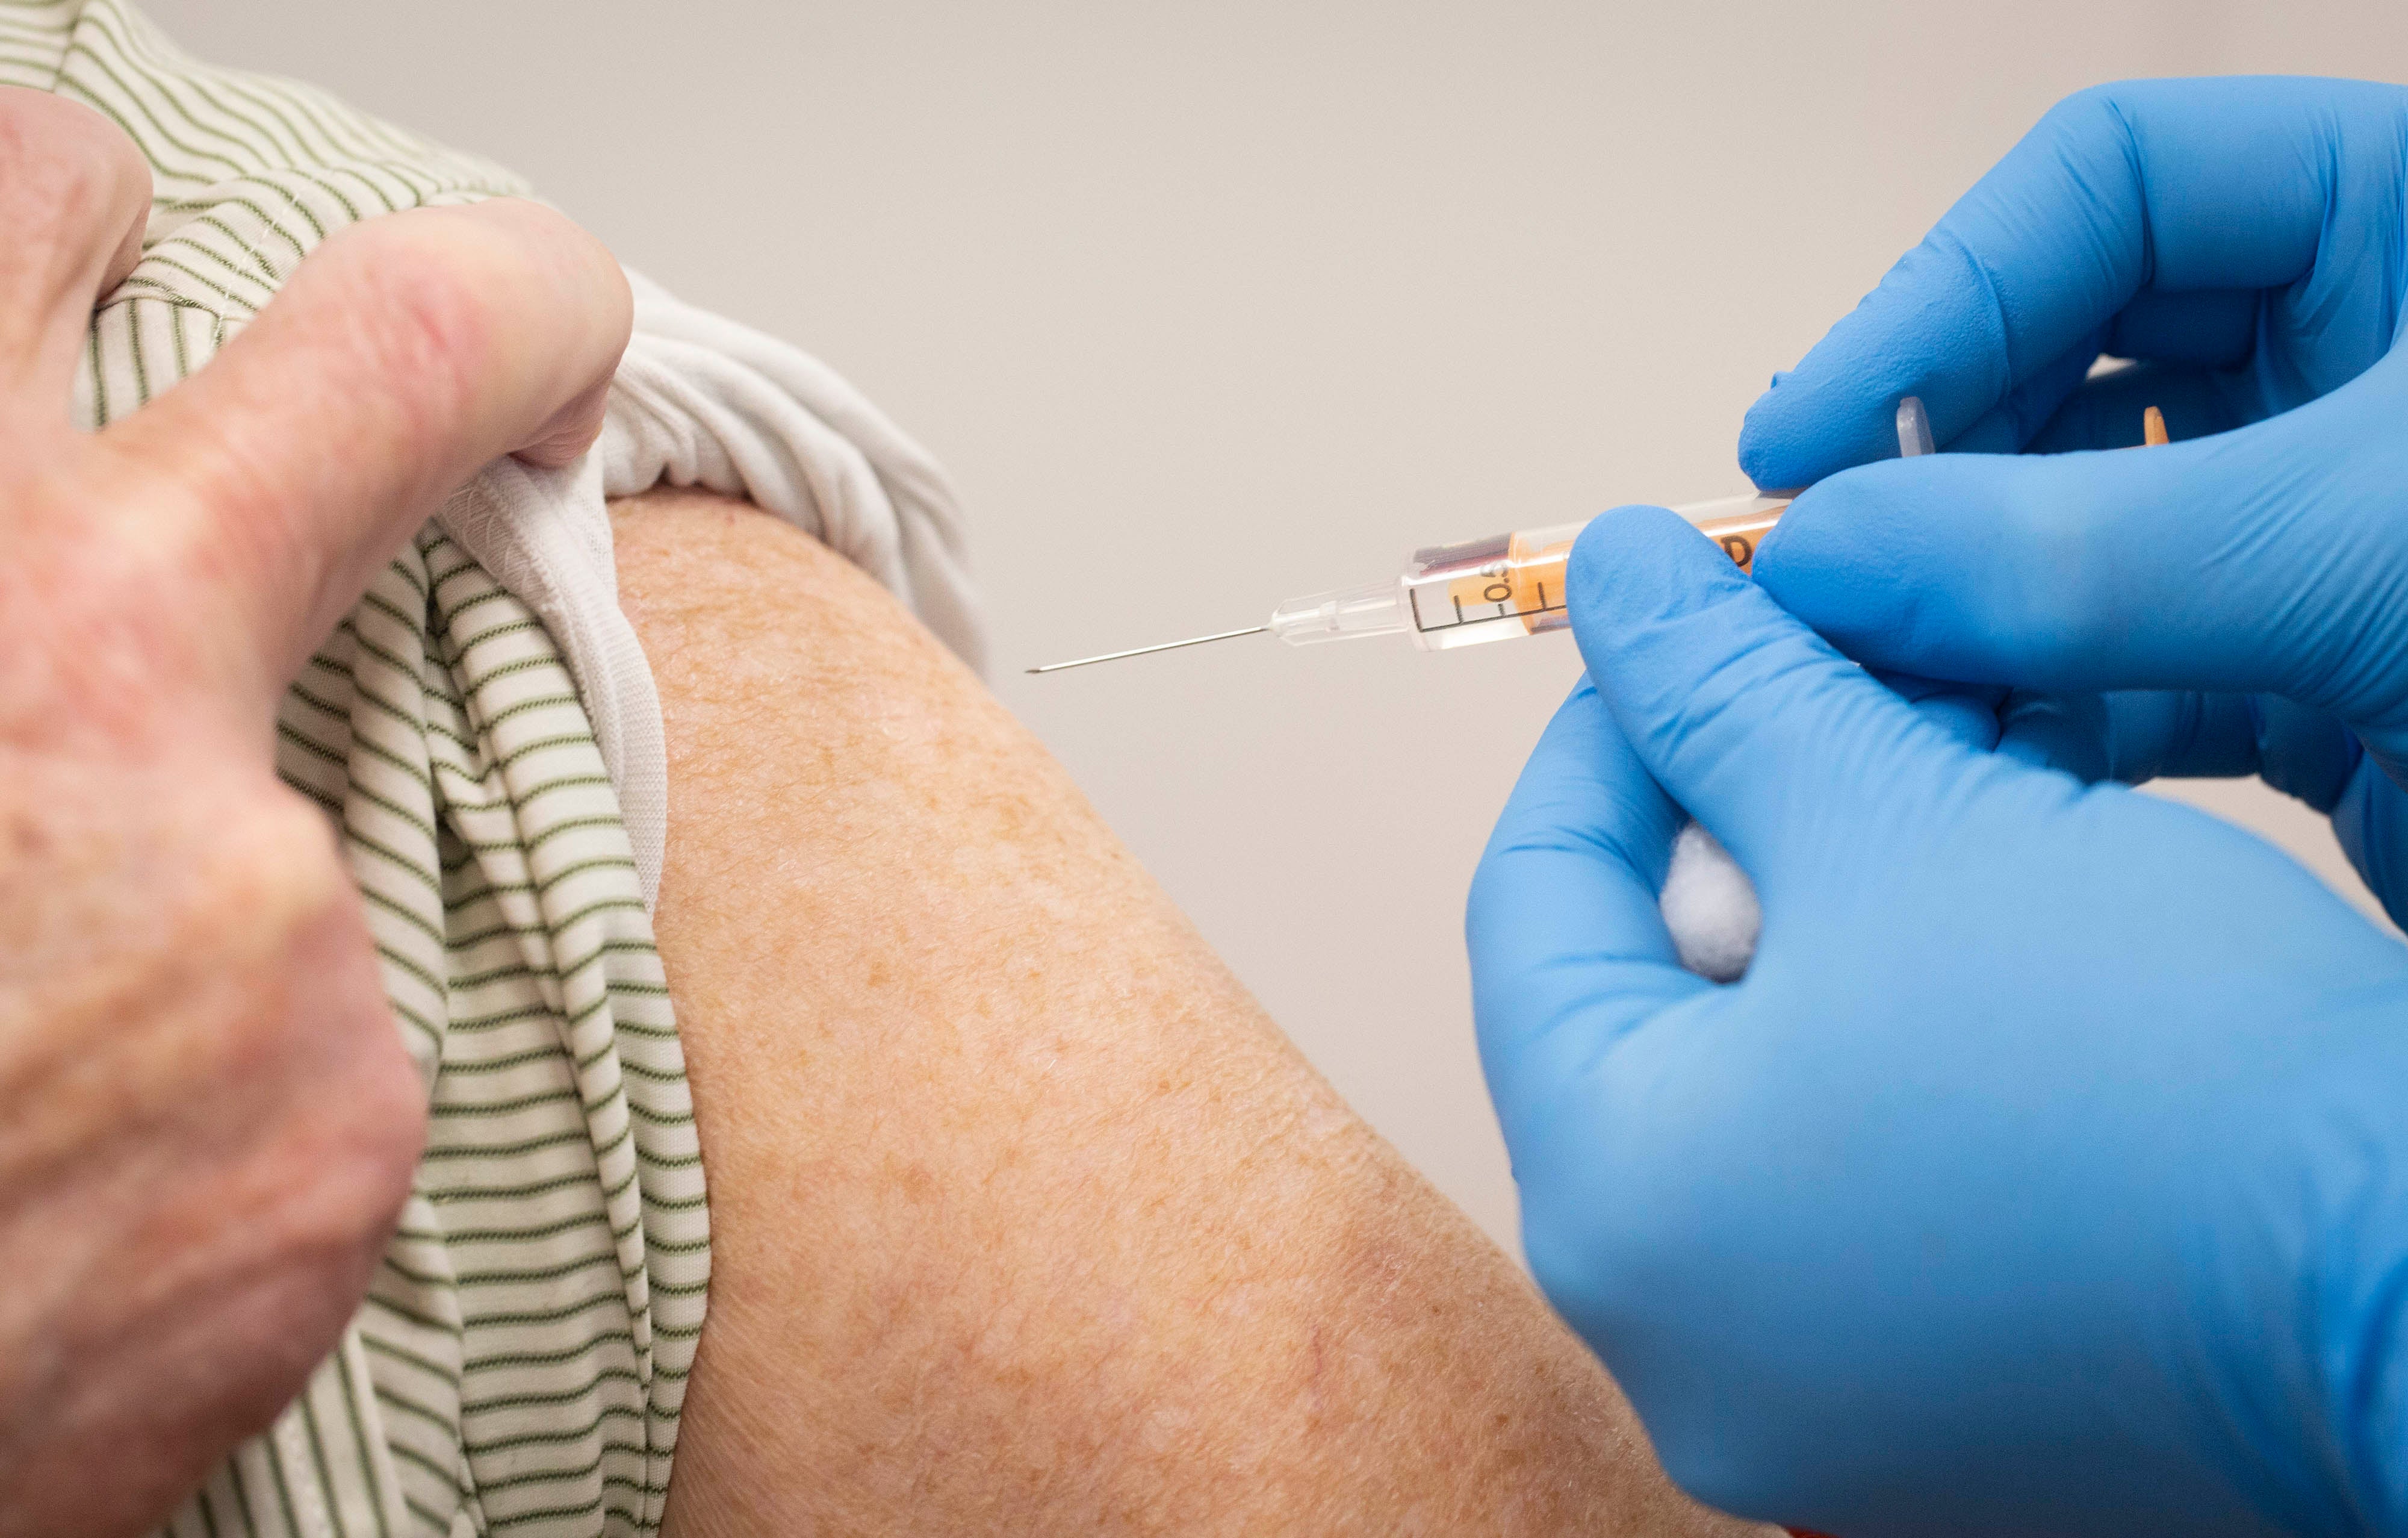 Police issued a statement reminding the public that coronavirus vaccines are only available in the UK via the NHS